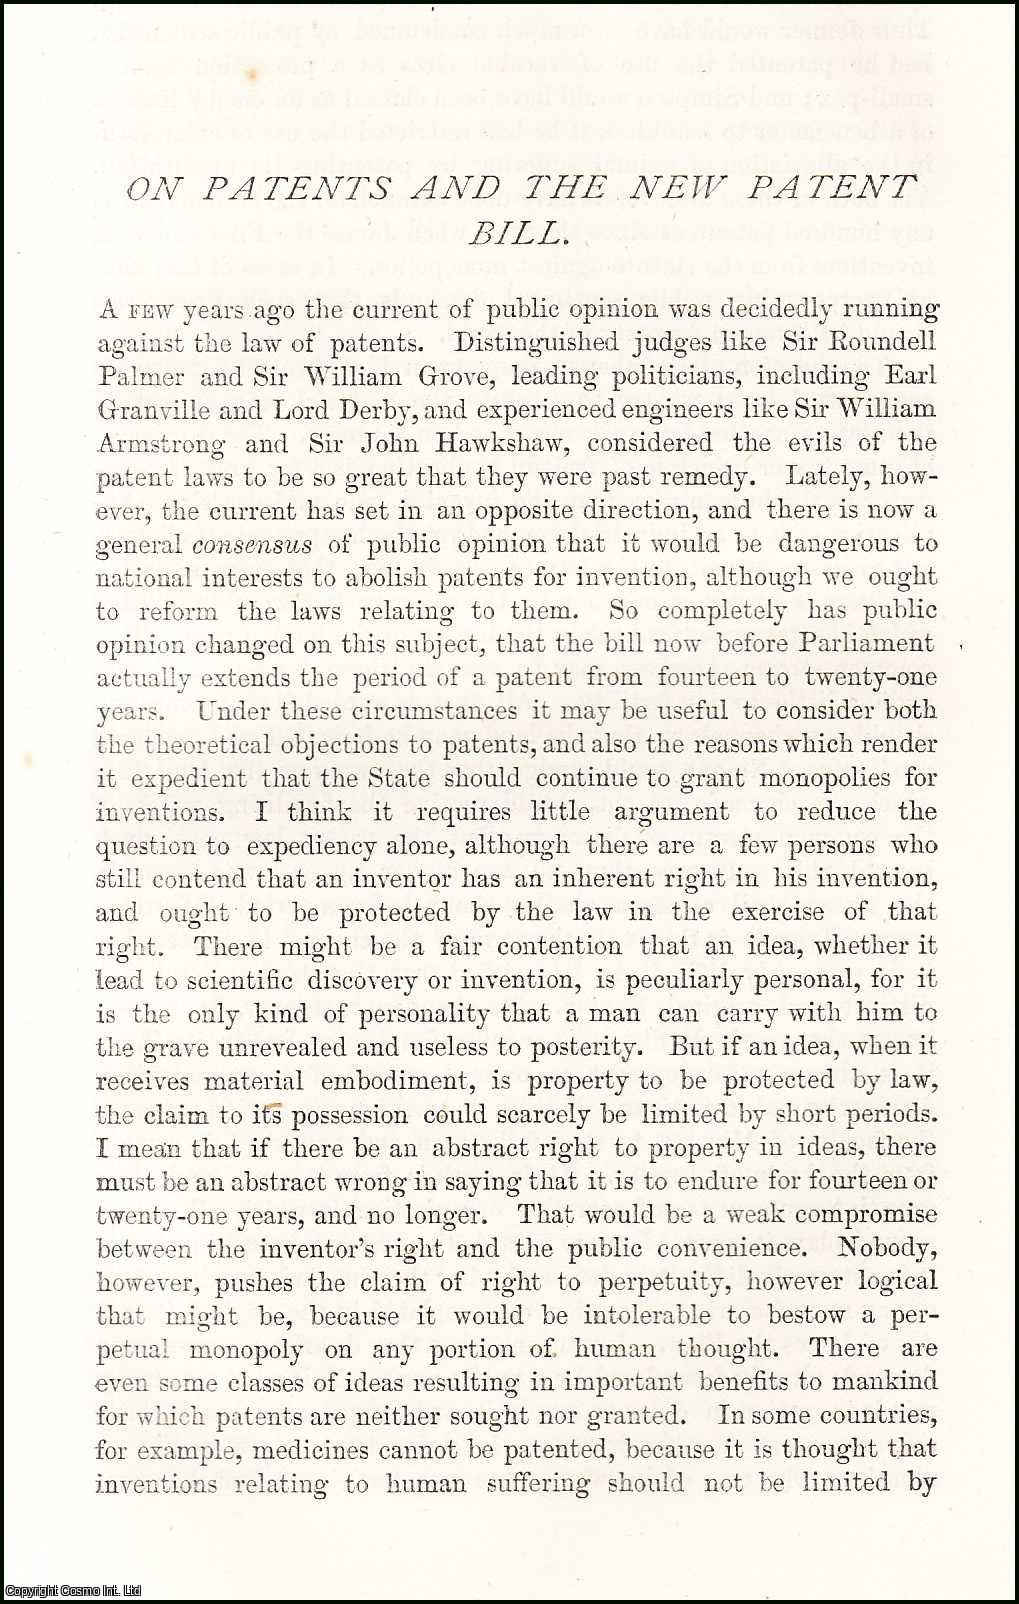 Lyon Playfair - On Patents and the new Patent Bill. An original article from the Nineteenth Century Magazine, 1877.